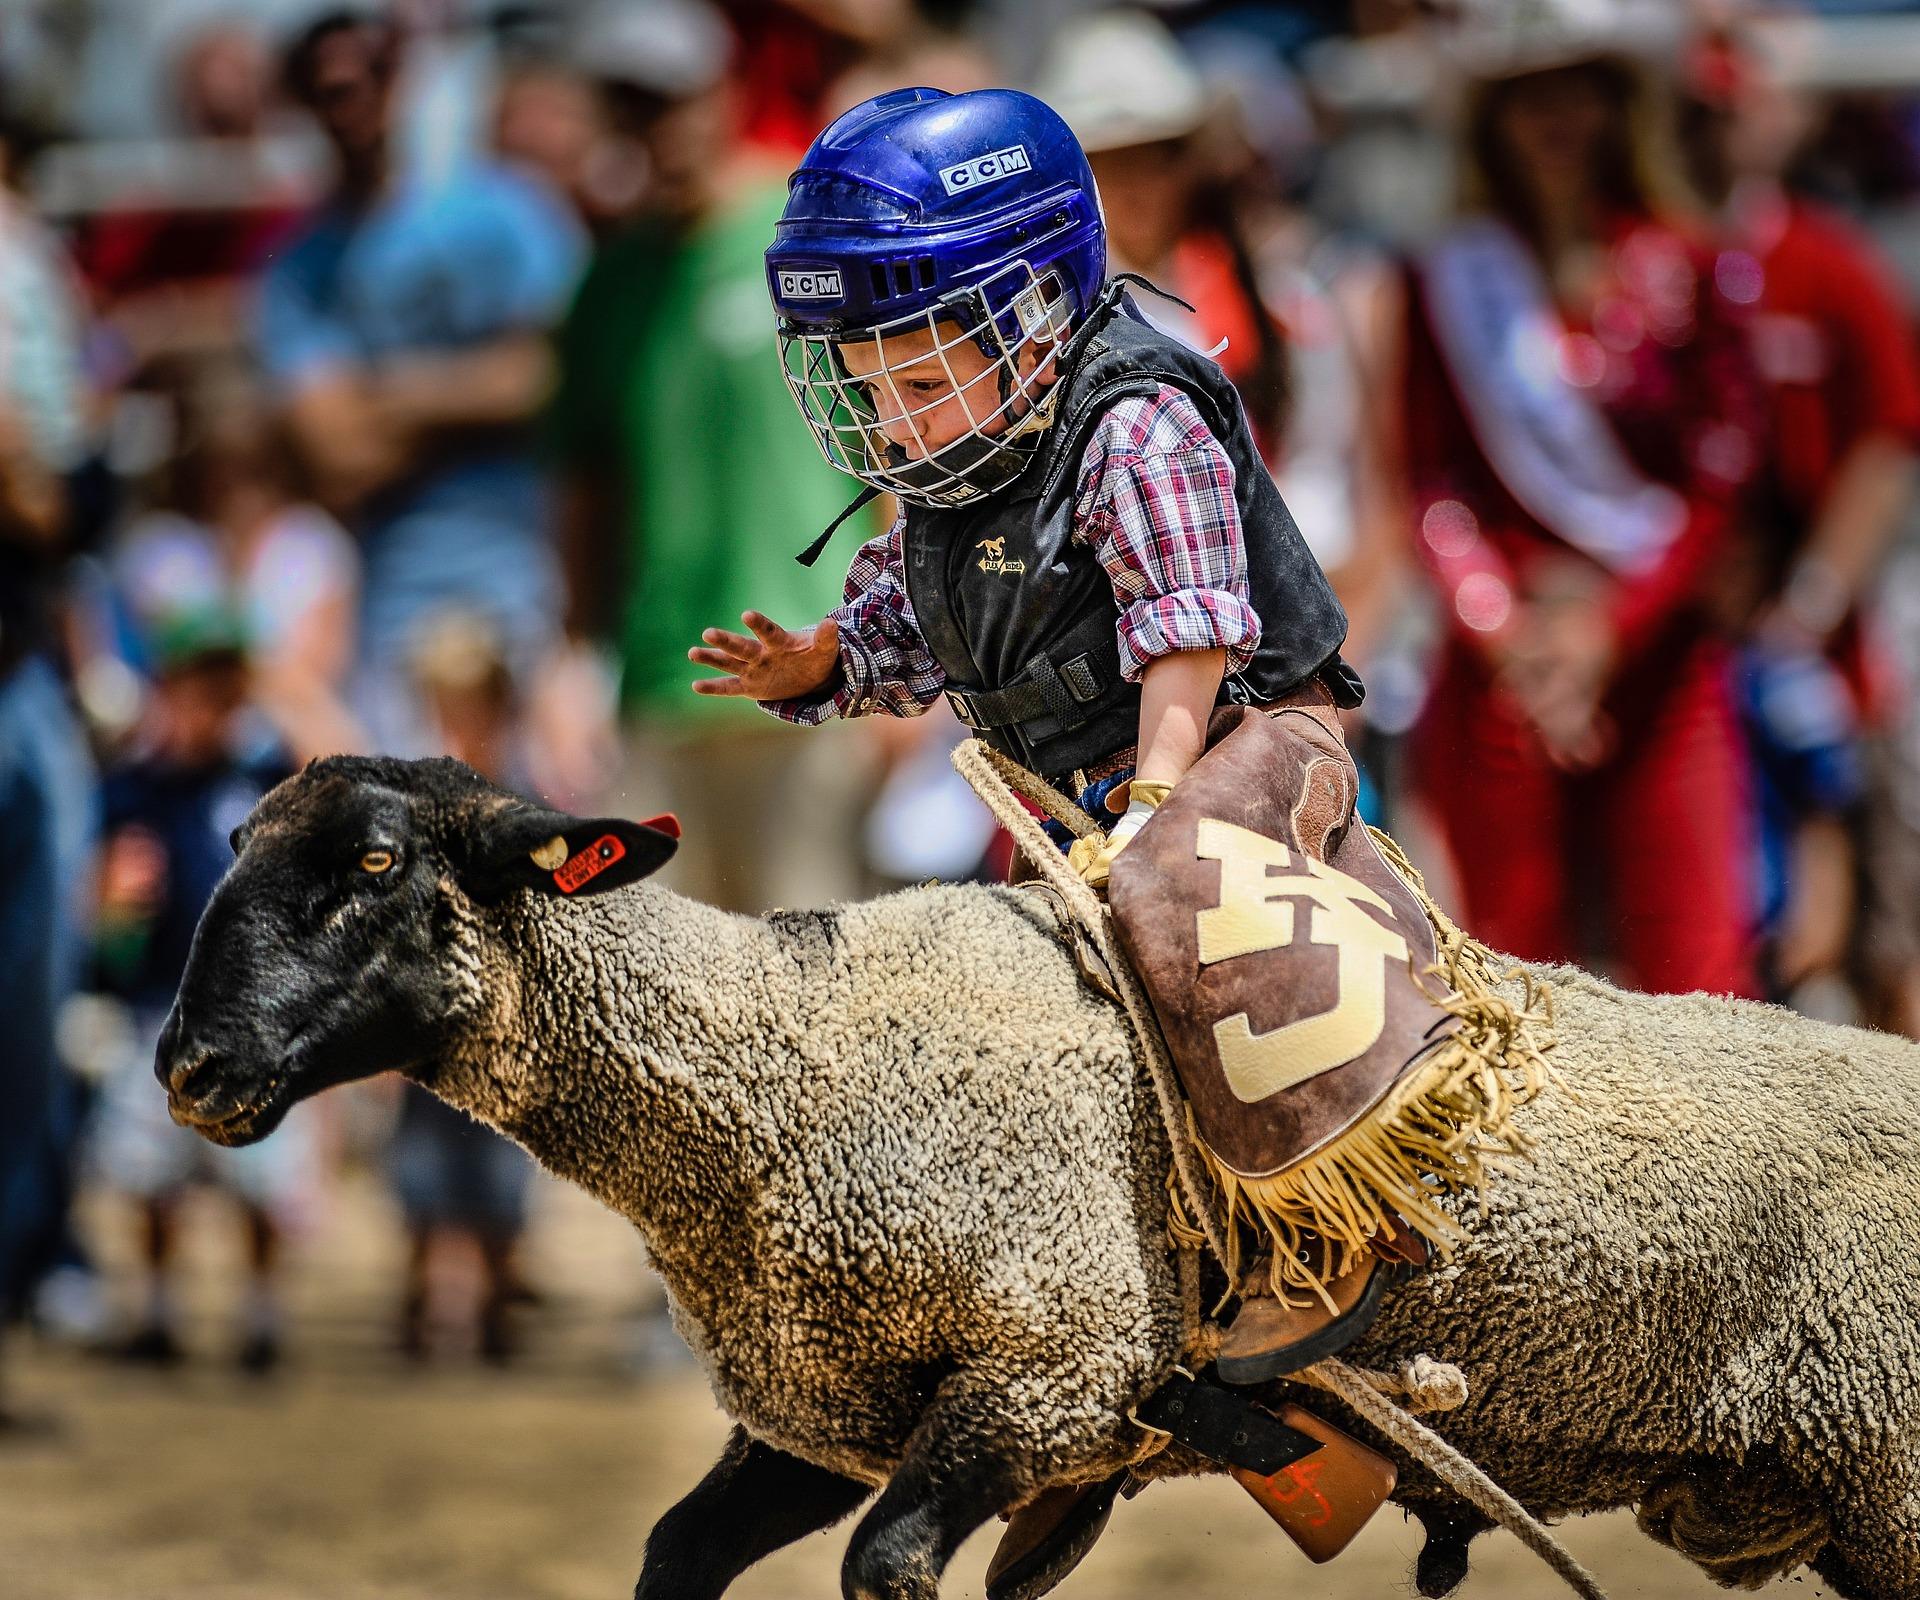 Image of a kid riding a sheep. He has a blue helmet on and is holding on